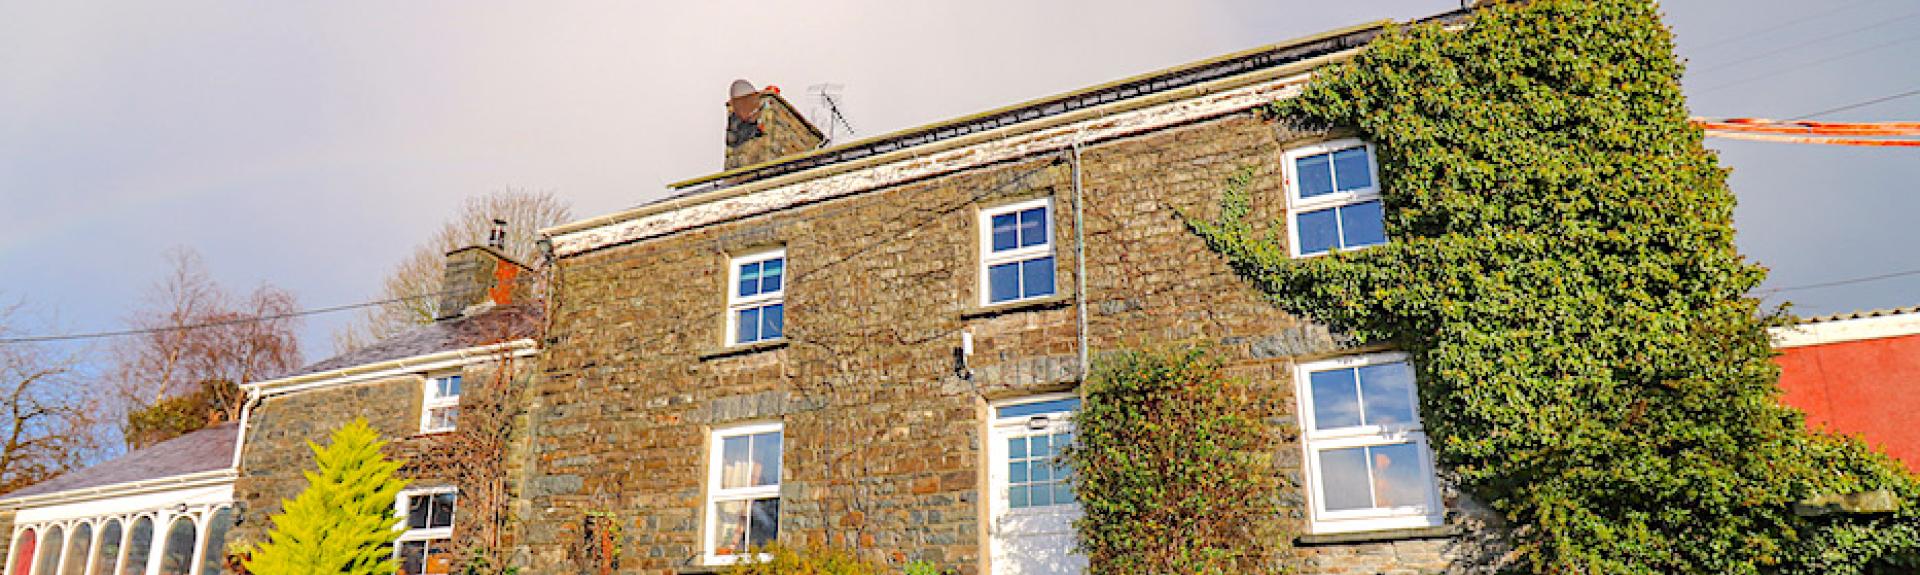 A double fronted, stone-built Welsh farmhouse sits on a flower-filled raised bank above a lane.